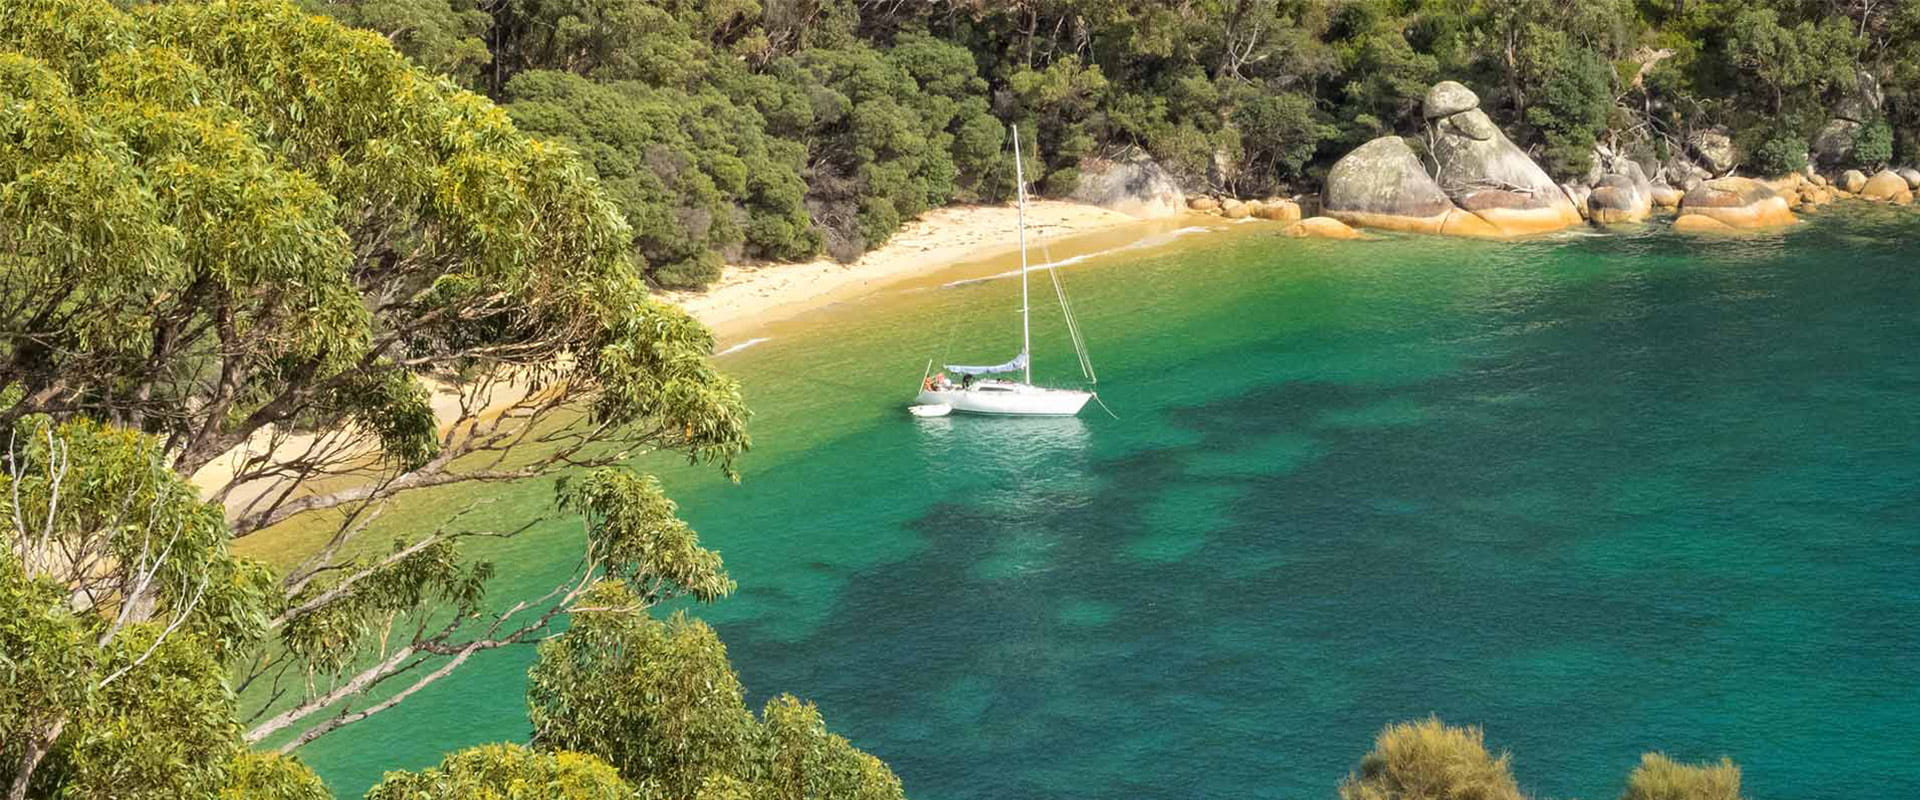 A yacht is anchored in an emerald green bay by a remote beach surrounded by dense trees and a pristine beach